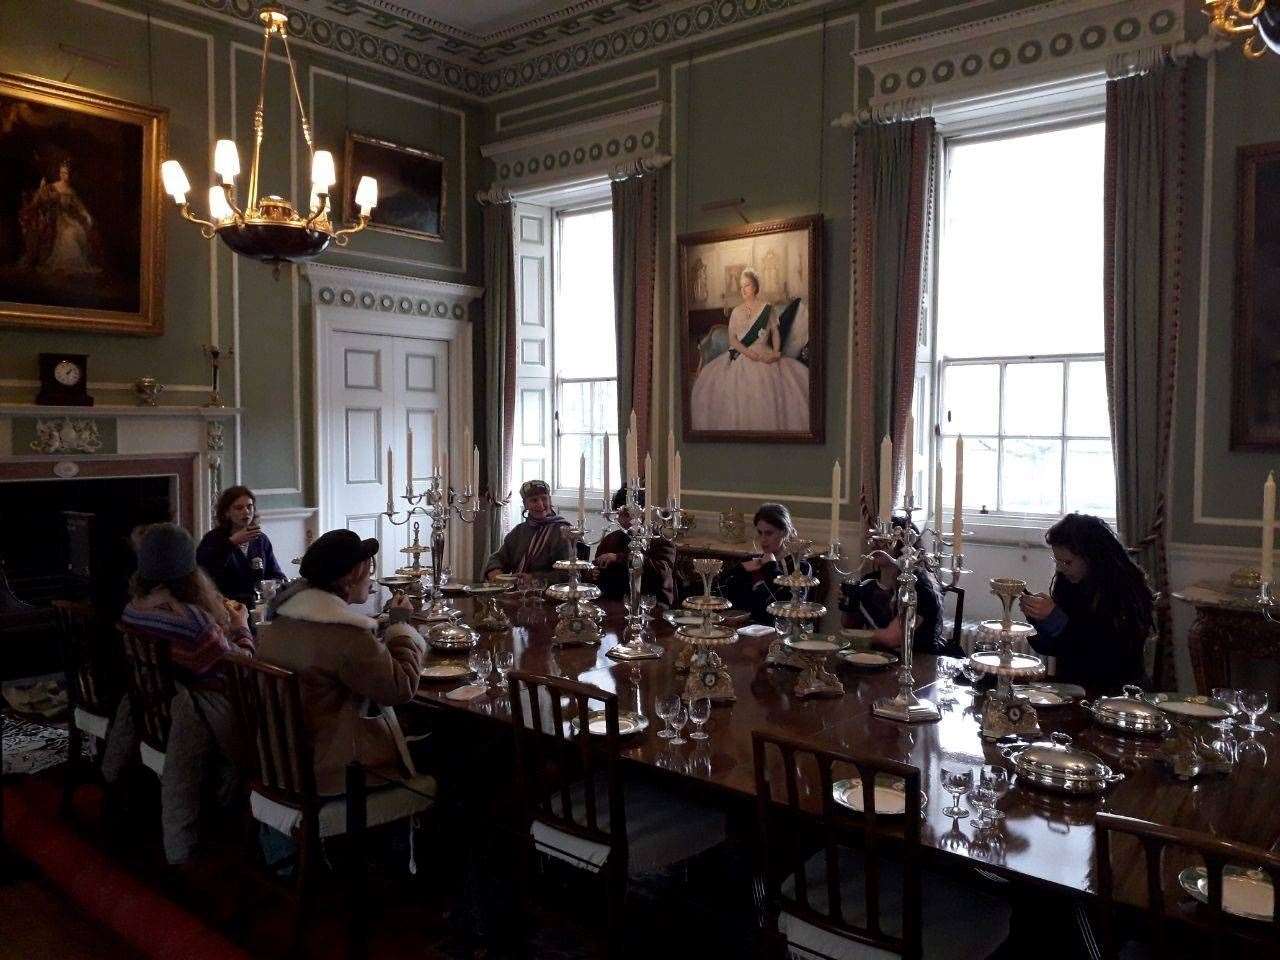 Activists ate from Tupperware and flasks in the royal dining room at the Palace of Holyroodhouse on Monday (This Is Rigged/PA)